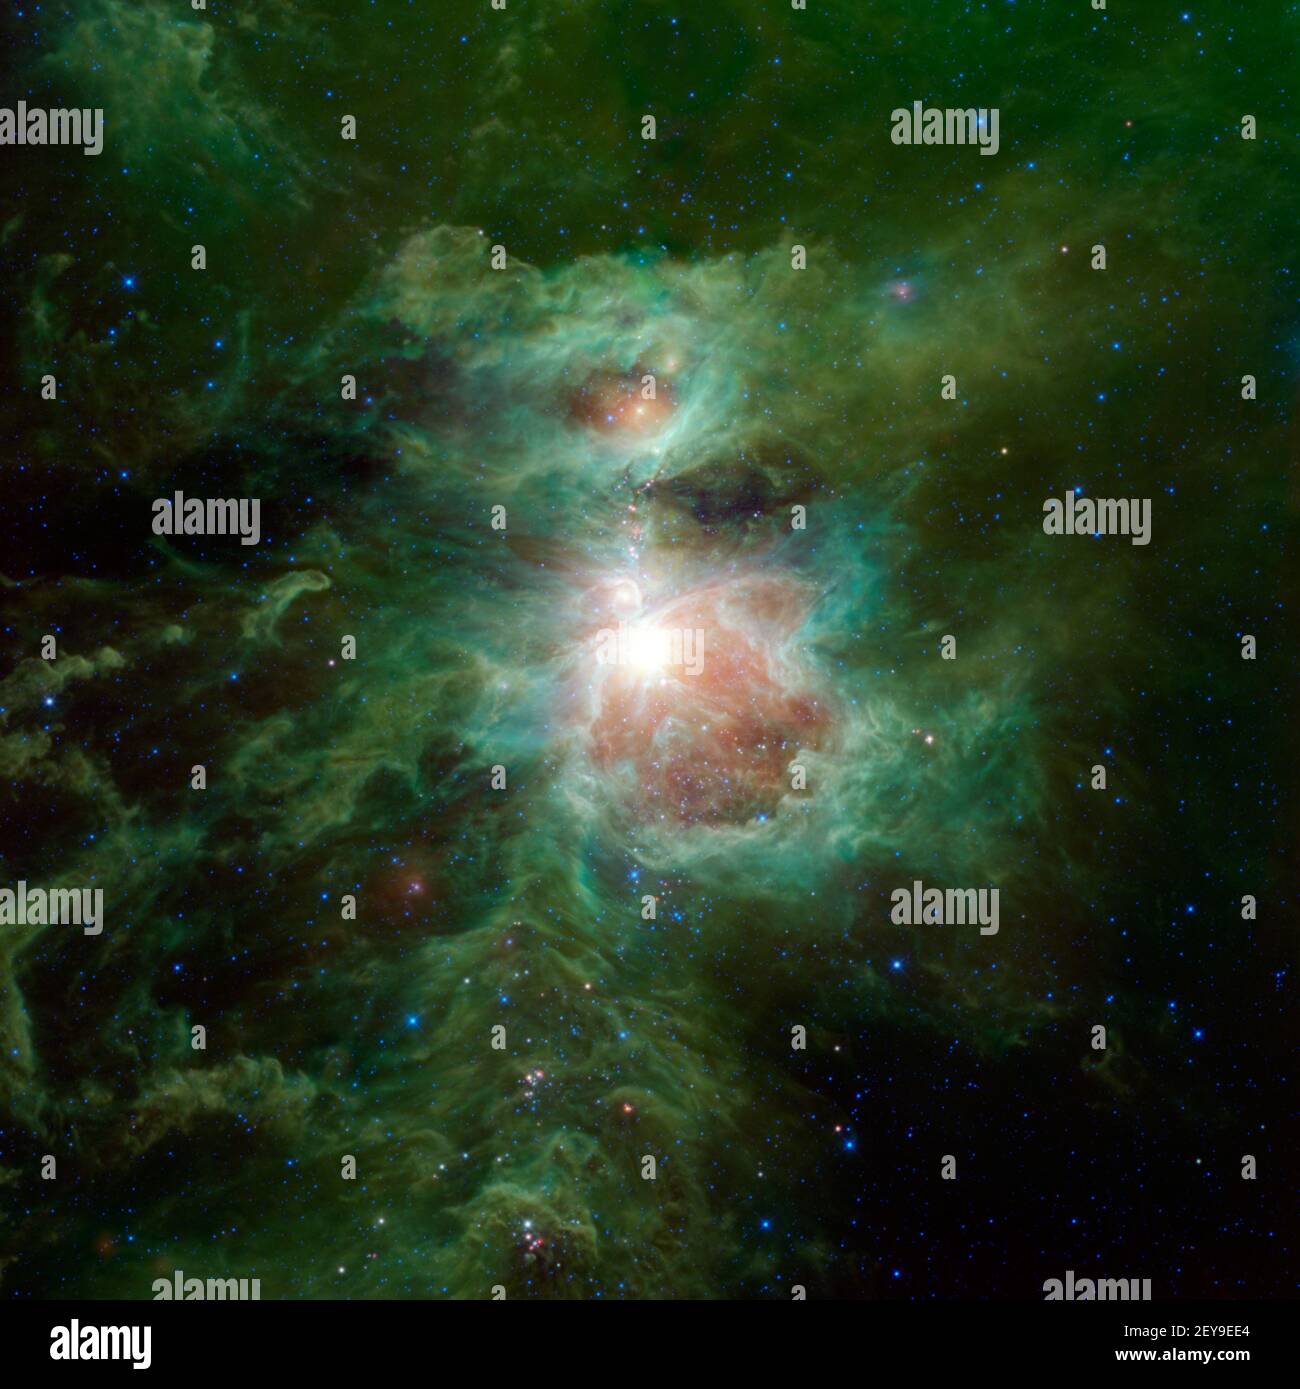 The Orion nebula is featured in this sweeping image from NASA's Wide-field Infrared Survey Explorer, or WISE. The constellation of Orion is prominent in the evening sky throughout the world from about December through April of each year. The nebula (also catalogued as Messier 42) is located in the sword of Orion, hanging from his famous belt of three stars. The star cluster embedded in the nebula is visible to the unaided human eye as a single star, with some fuzziness apparent to the most keen-eyed observers. Because of its prominence, cultures all around the world have given special signific Stock Photo